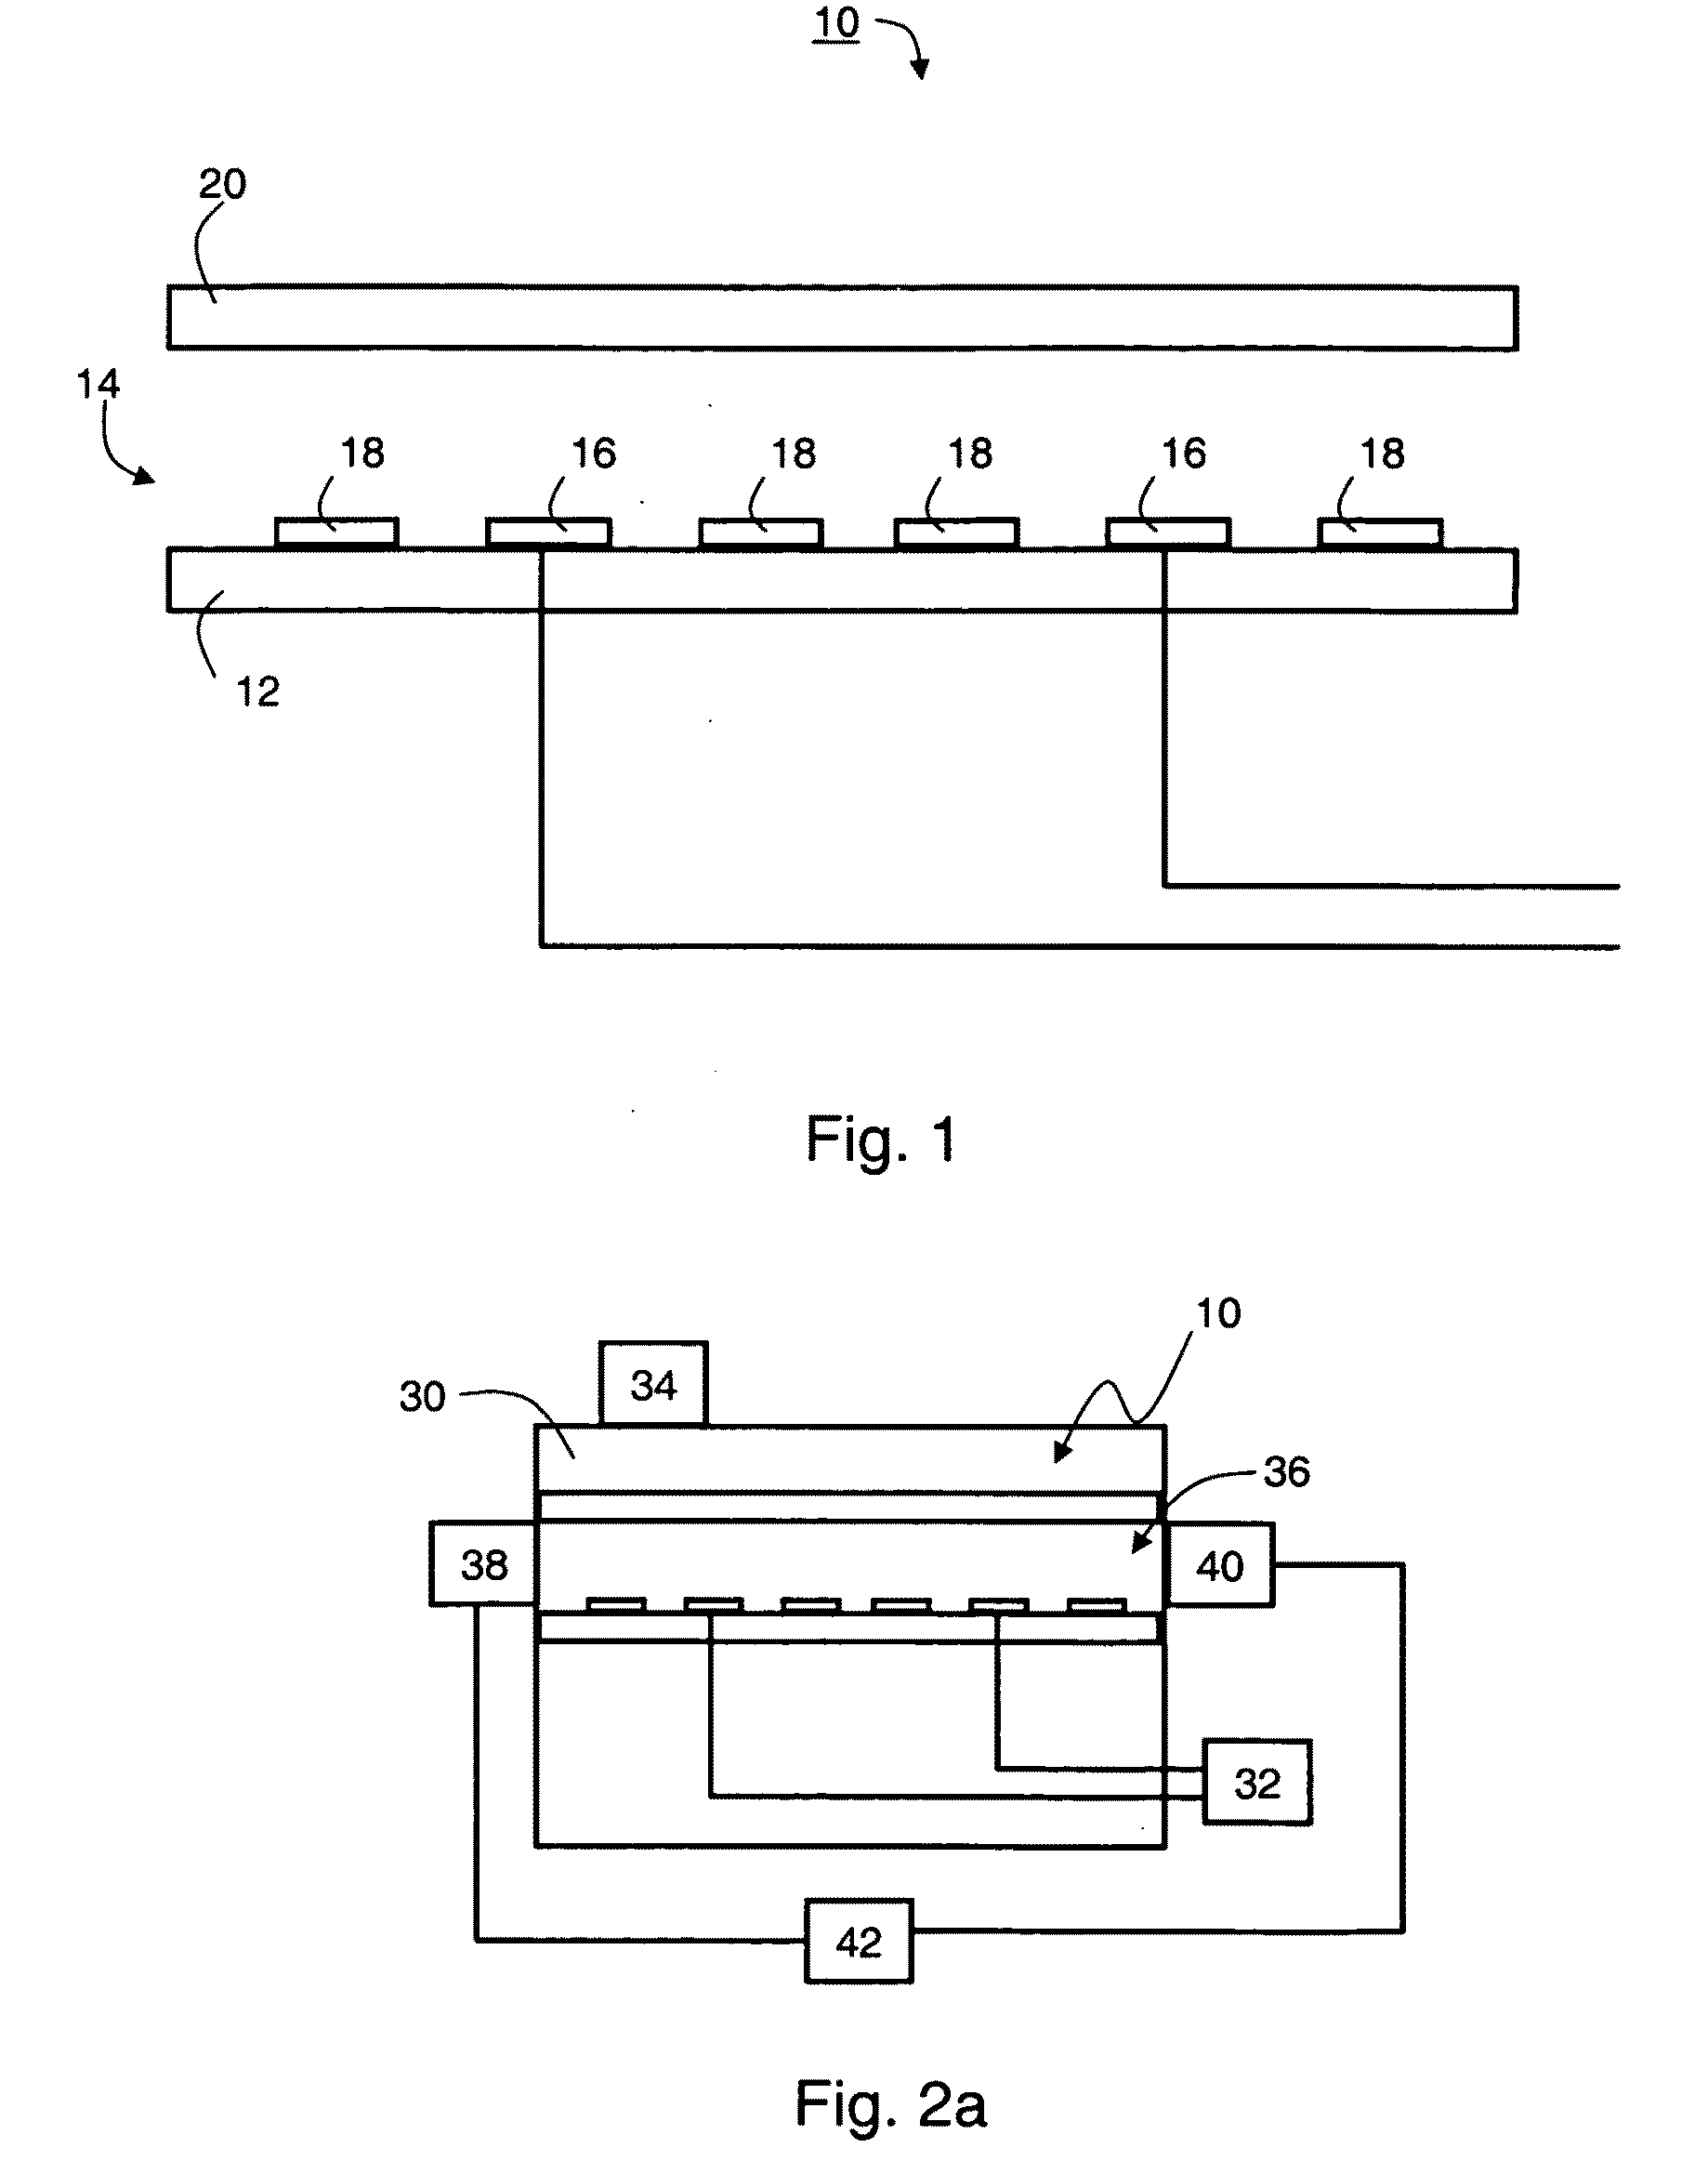 Method and Device for Electrokinetic Manipulation